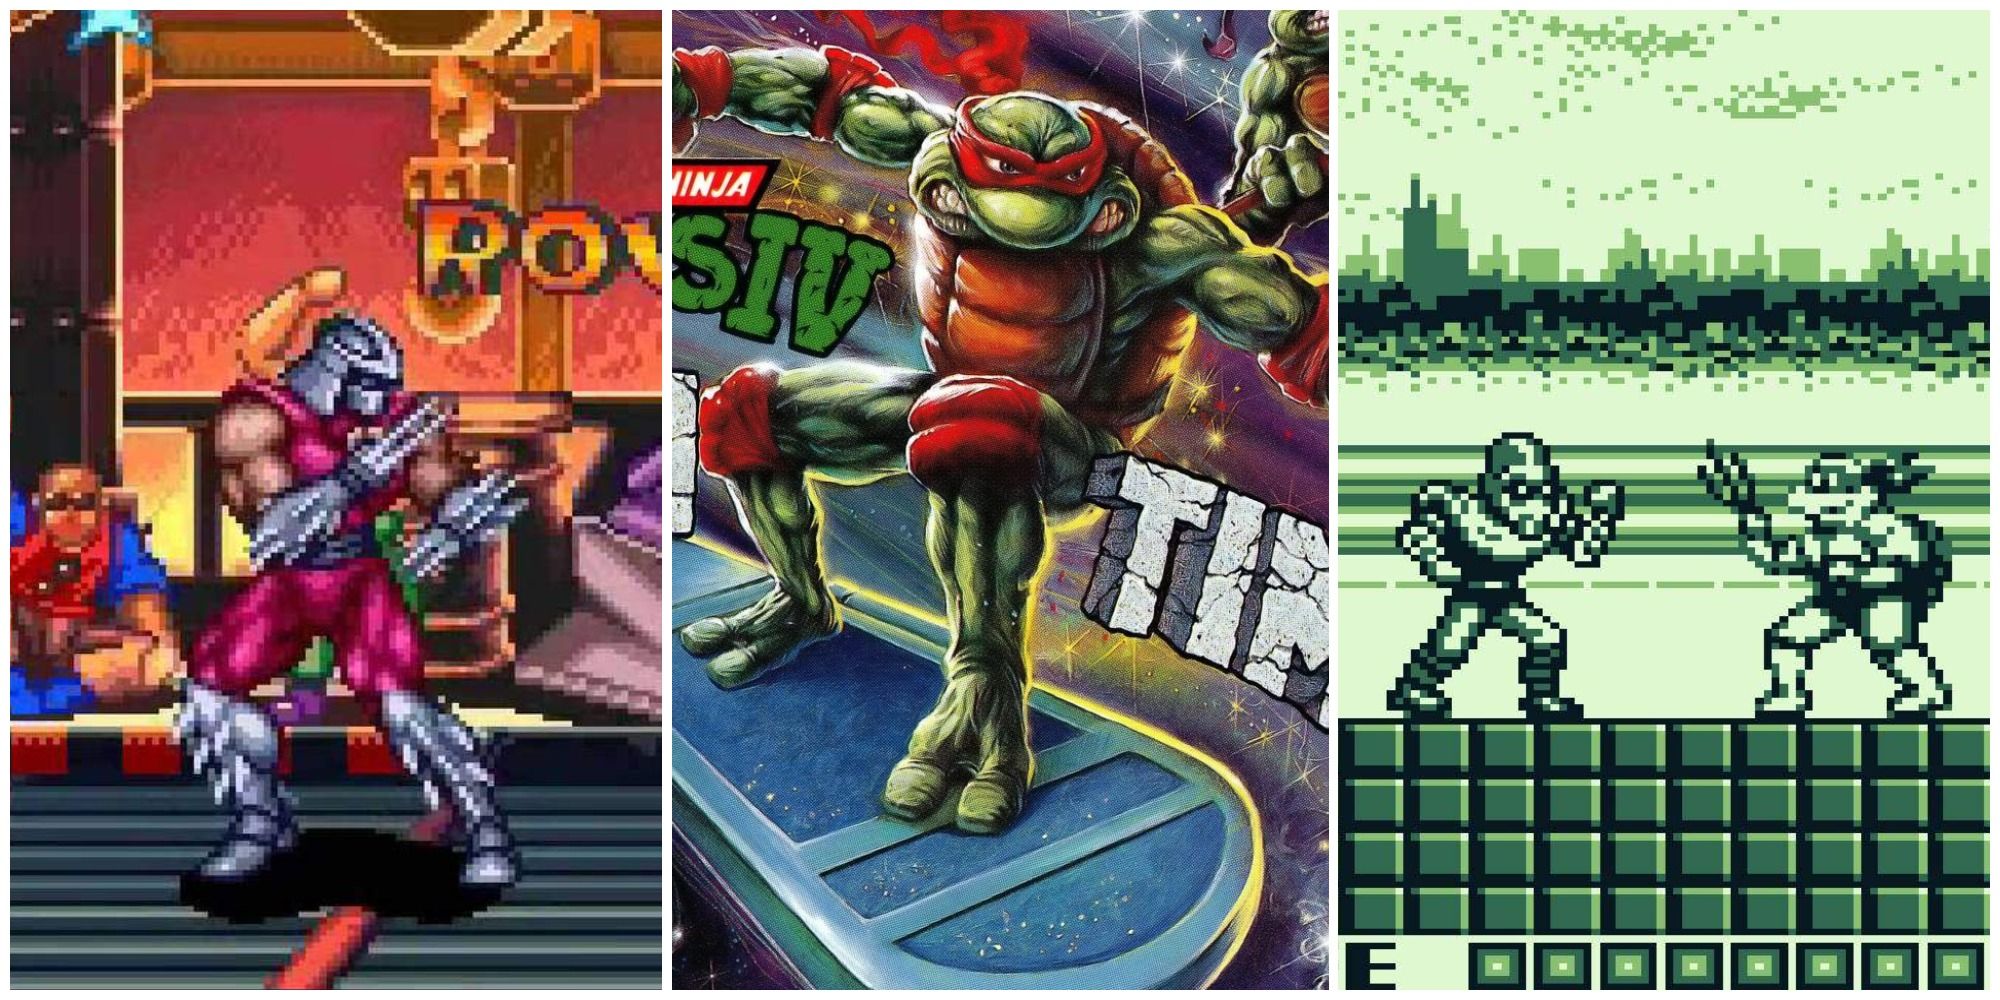 Shredder, Raph, and Gameboy Raph from left to right